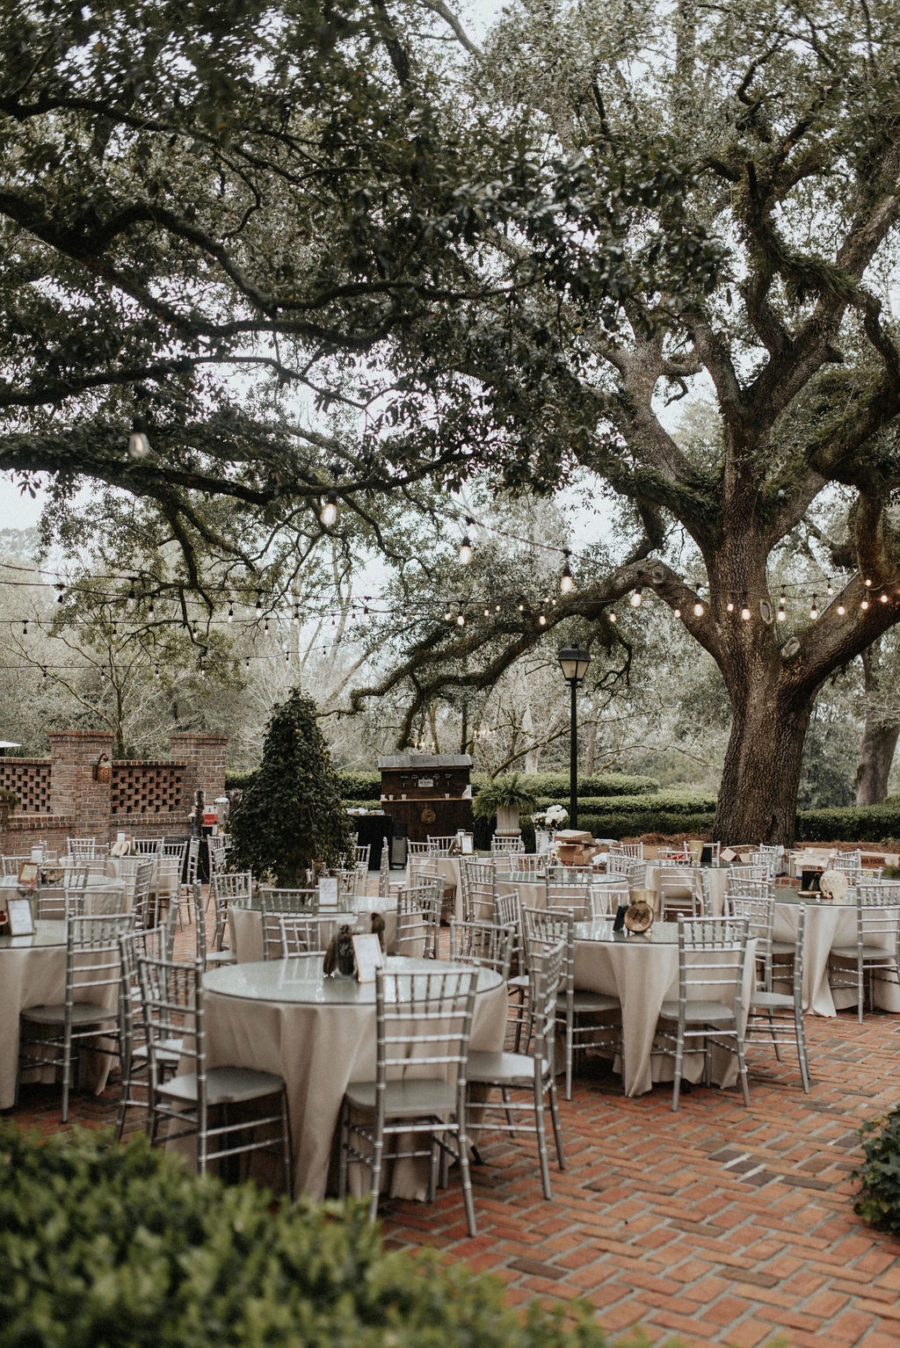 Quinney Oaks Plantation wedding: Magical Winter Wedding by Meghan Melia Photography featured on Nashville Bride Guide!